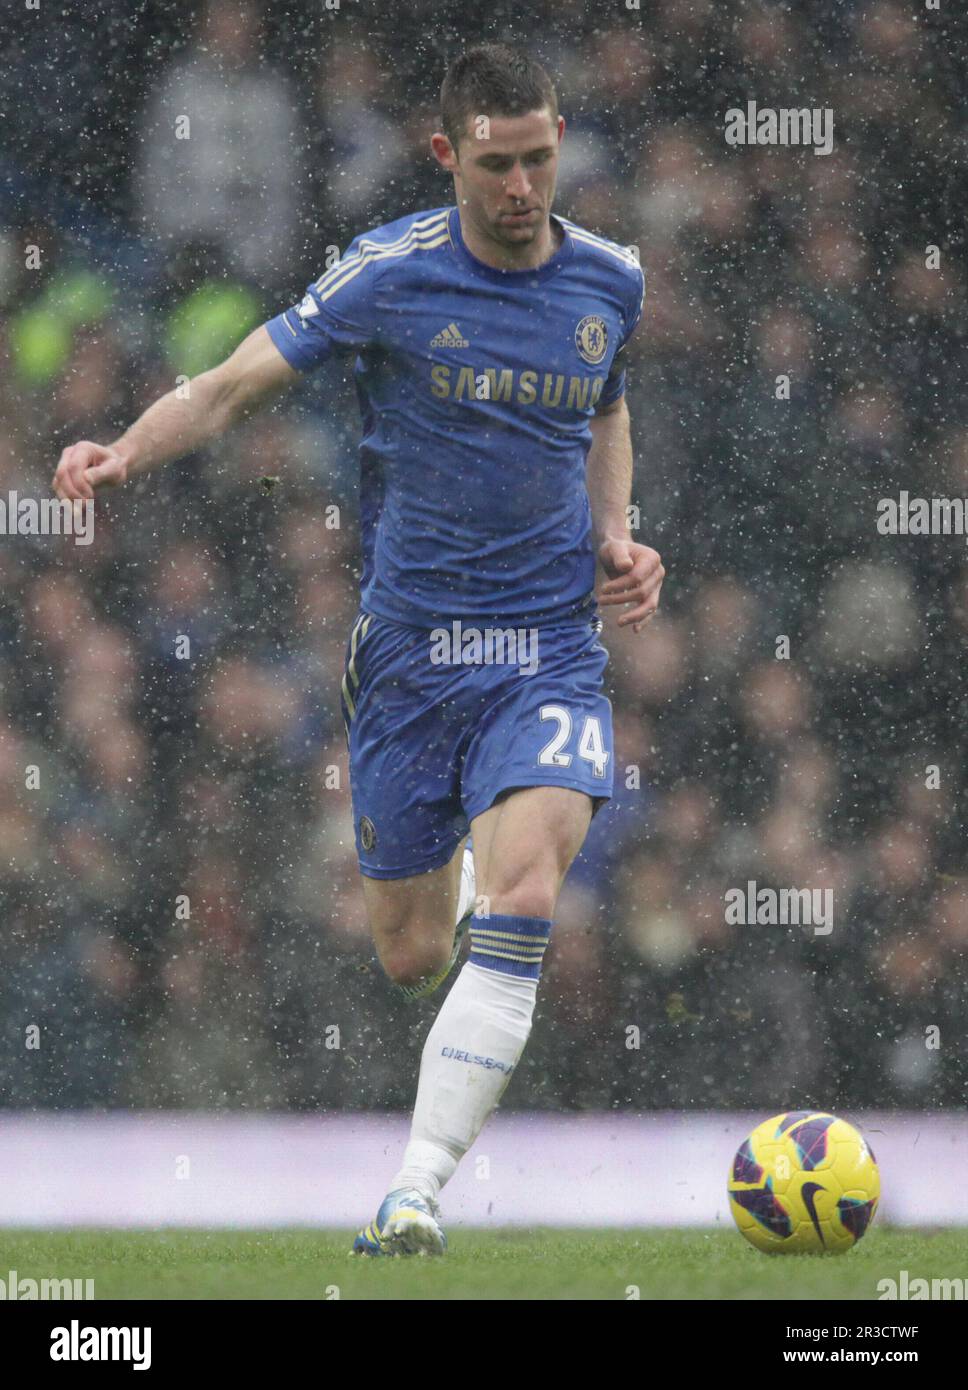 Chelsea's Gary Cahill in action during todays match. Chelsea beat Arsenal 2:1Chelsea 20/01/13 Chelsea V Arsenal  20/01/13 The Premier League Photo: Ri Stock Photo